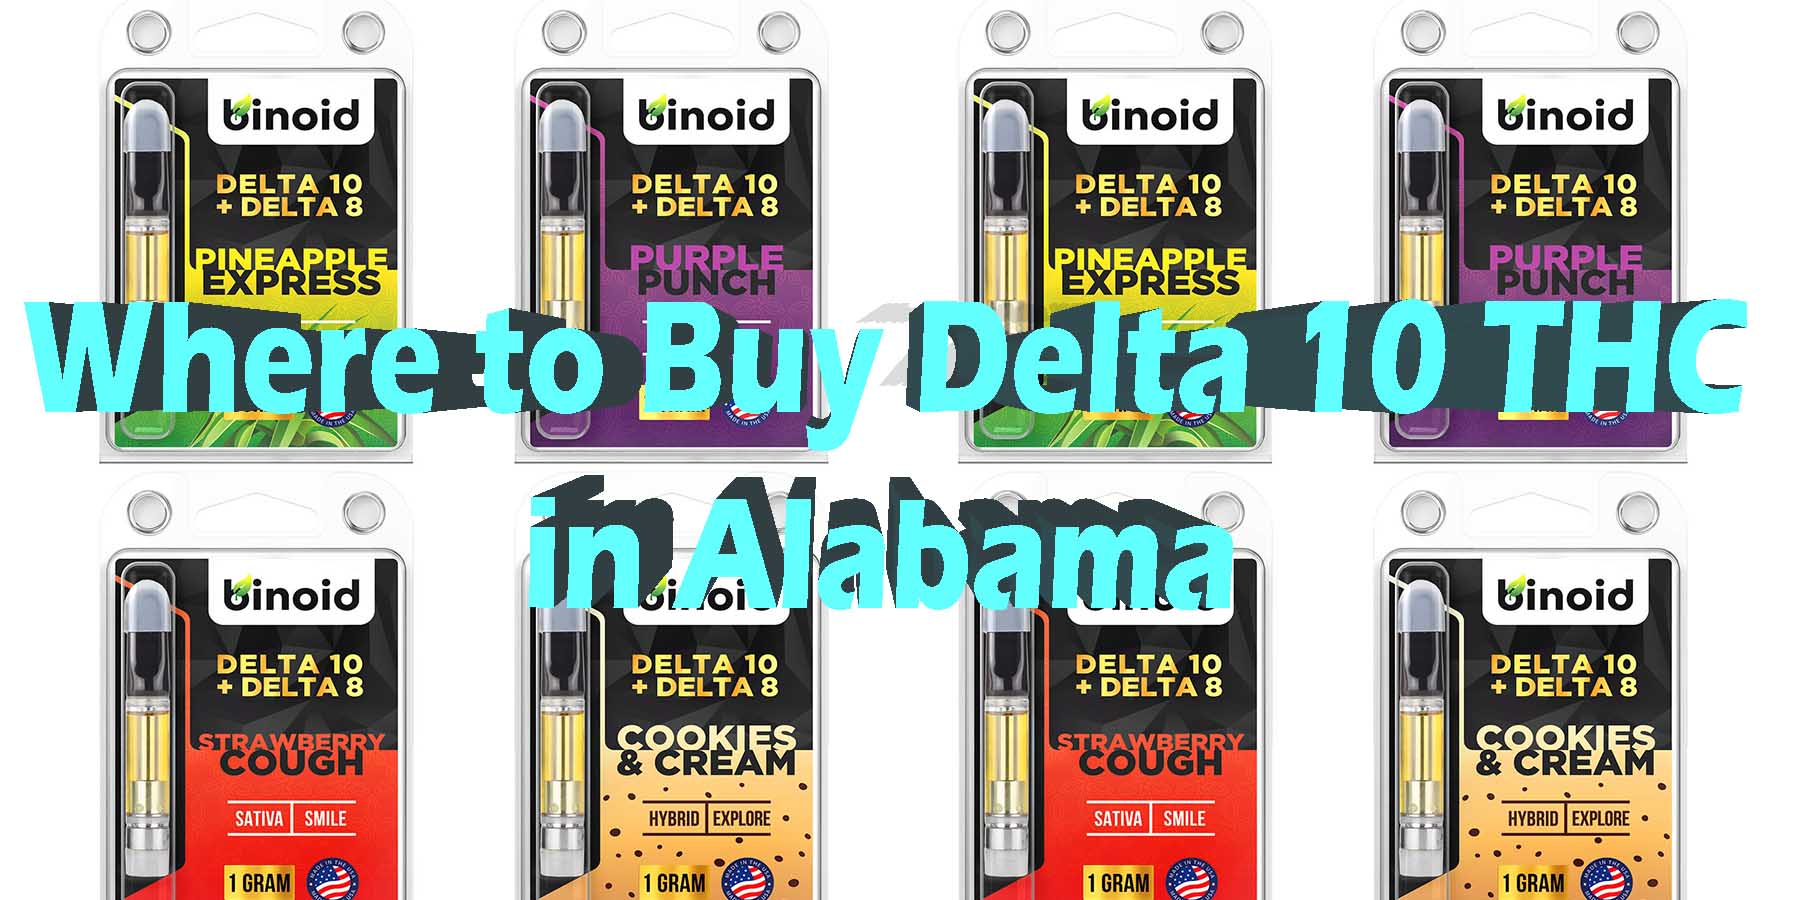 Where to Buy Delta 10 THC in Alabama Discount For Smoking High Smoke Shop Online Near Me Strongest Binoid Delta Extrax Buy Online BestPlace LowestPrice Coupon Binoid.